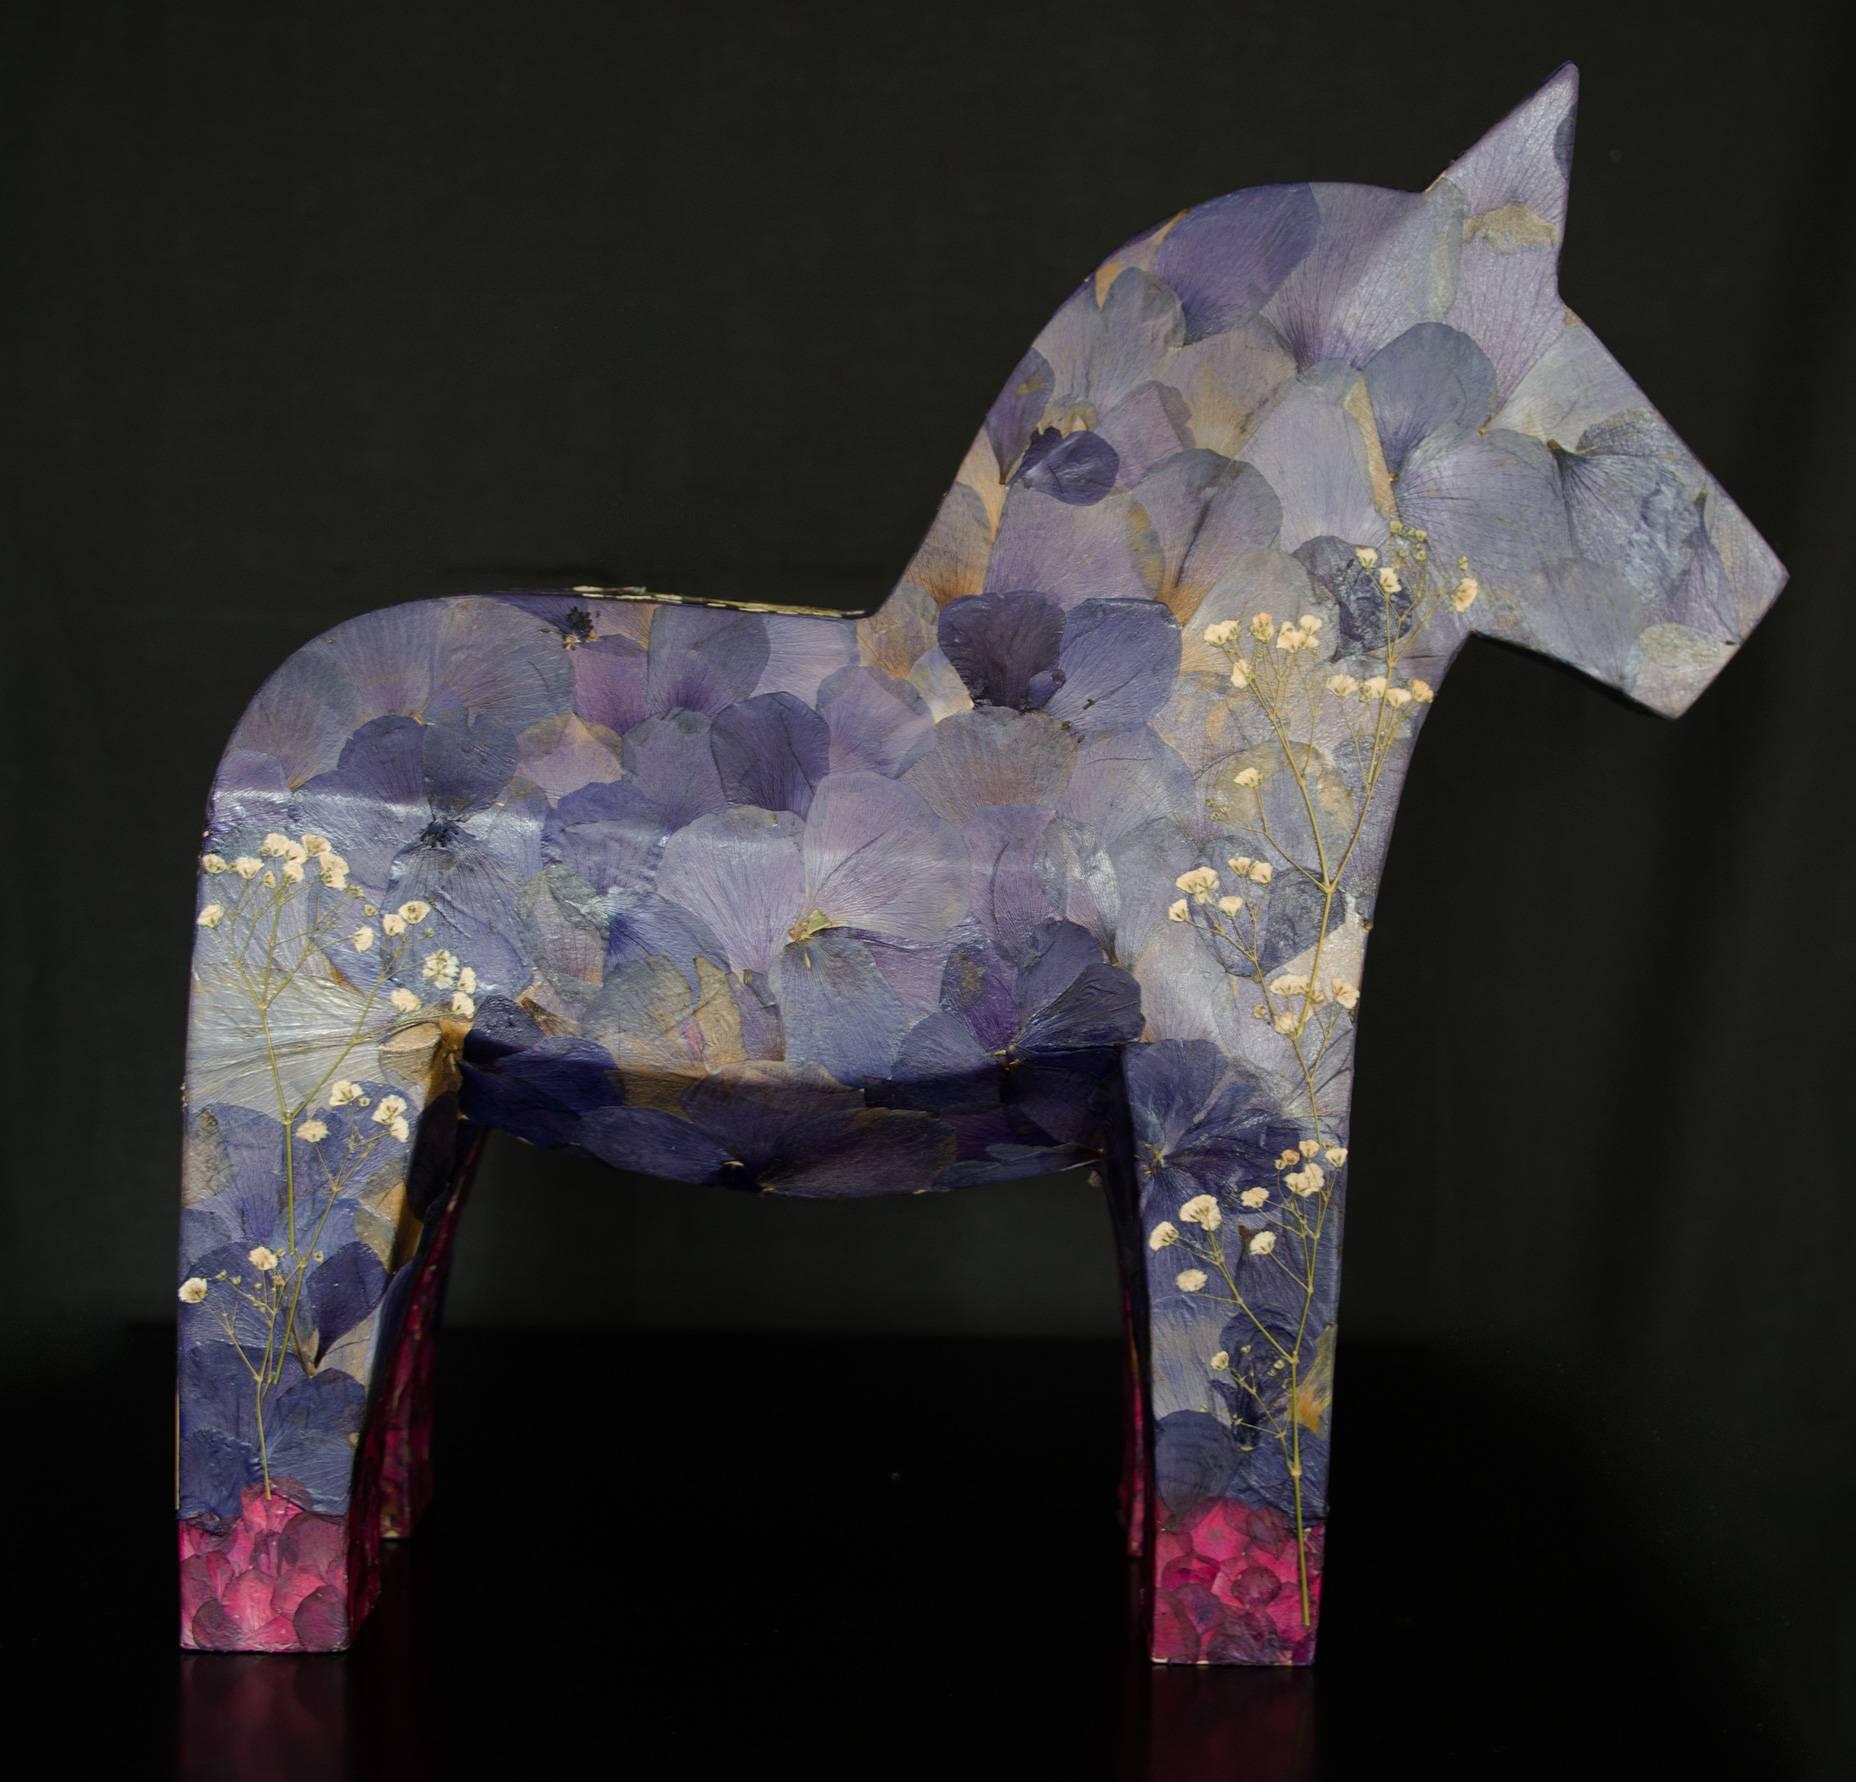 Aoi aoi ano sora (the blue sky), pressed flowers on wood horse - Sculpture by K-OD